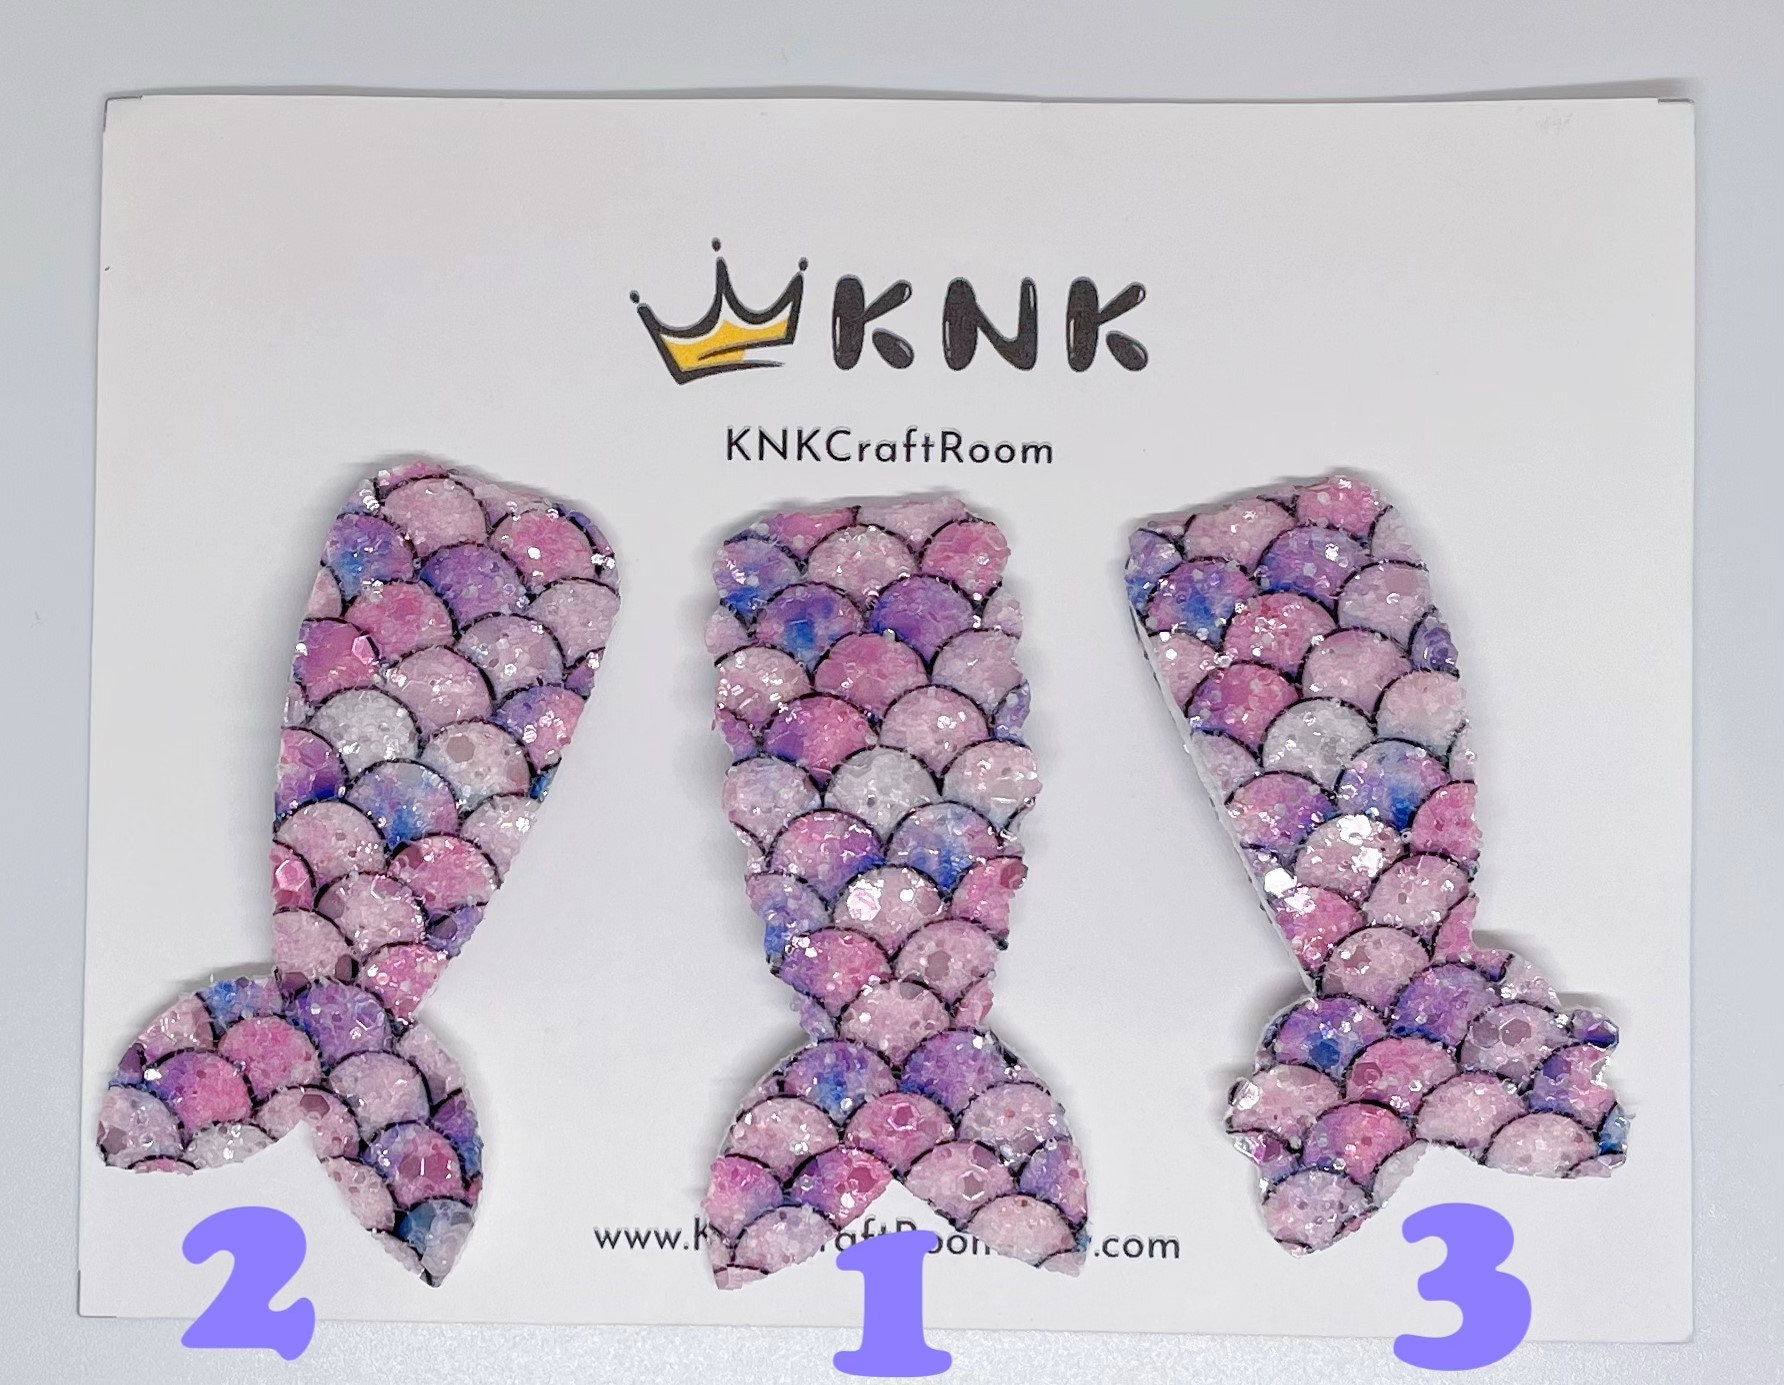 cnhairaccessories 2pcs Back to School Glitter Snap Hair Clips